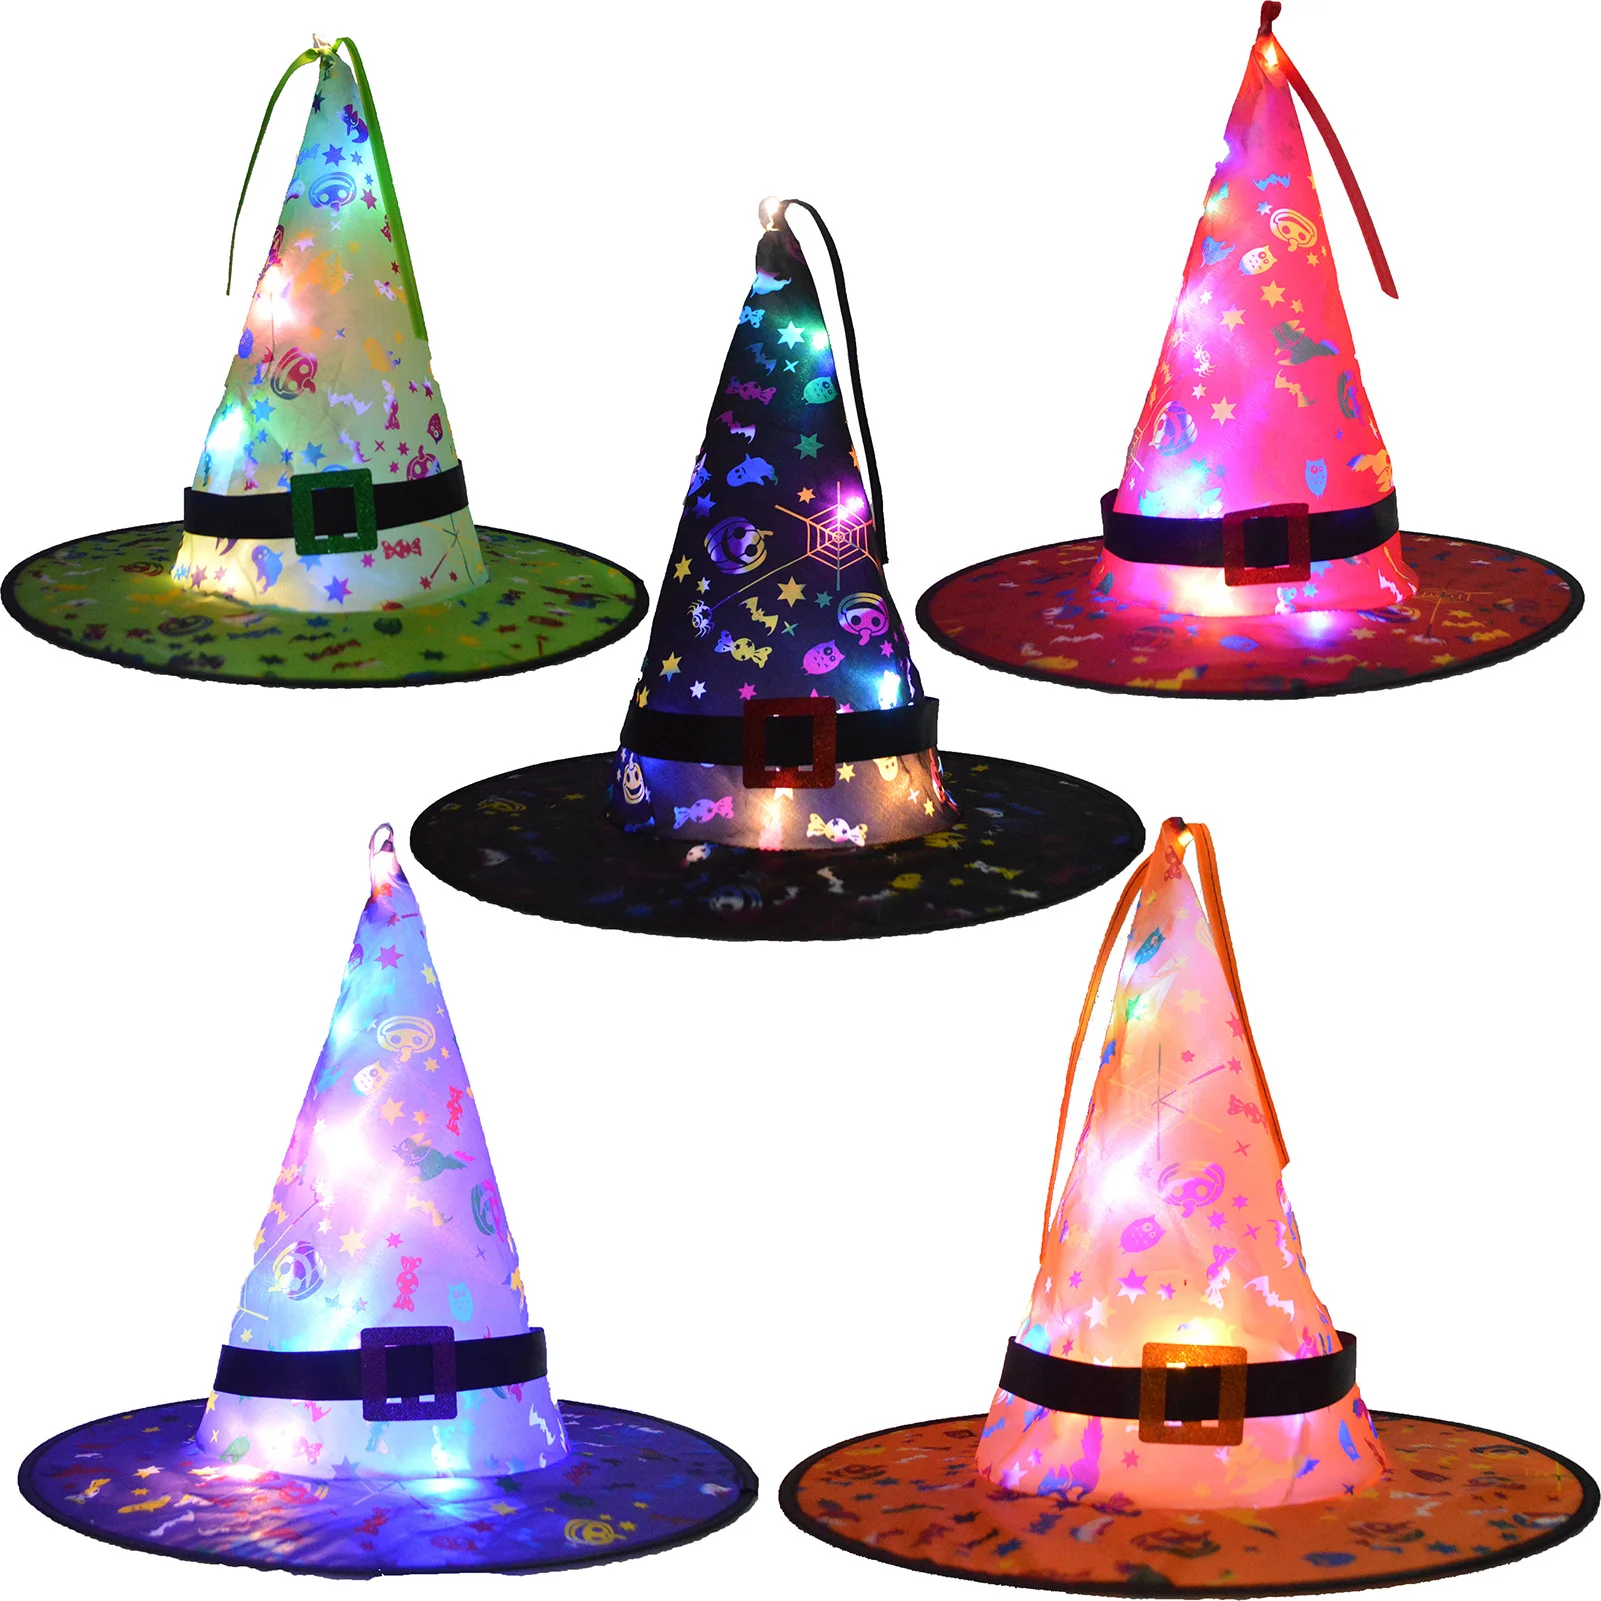 

5PCS Halloween LED Lighted Witch Hat Hanging Headwear Cosplay Party Props Halloween Decor Suspension Tree Glowing Hat Improved